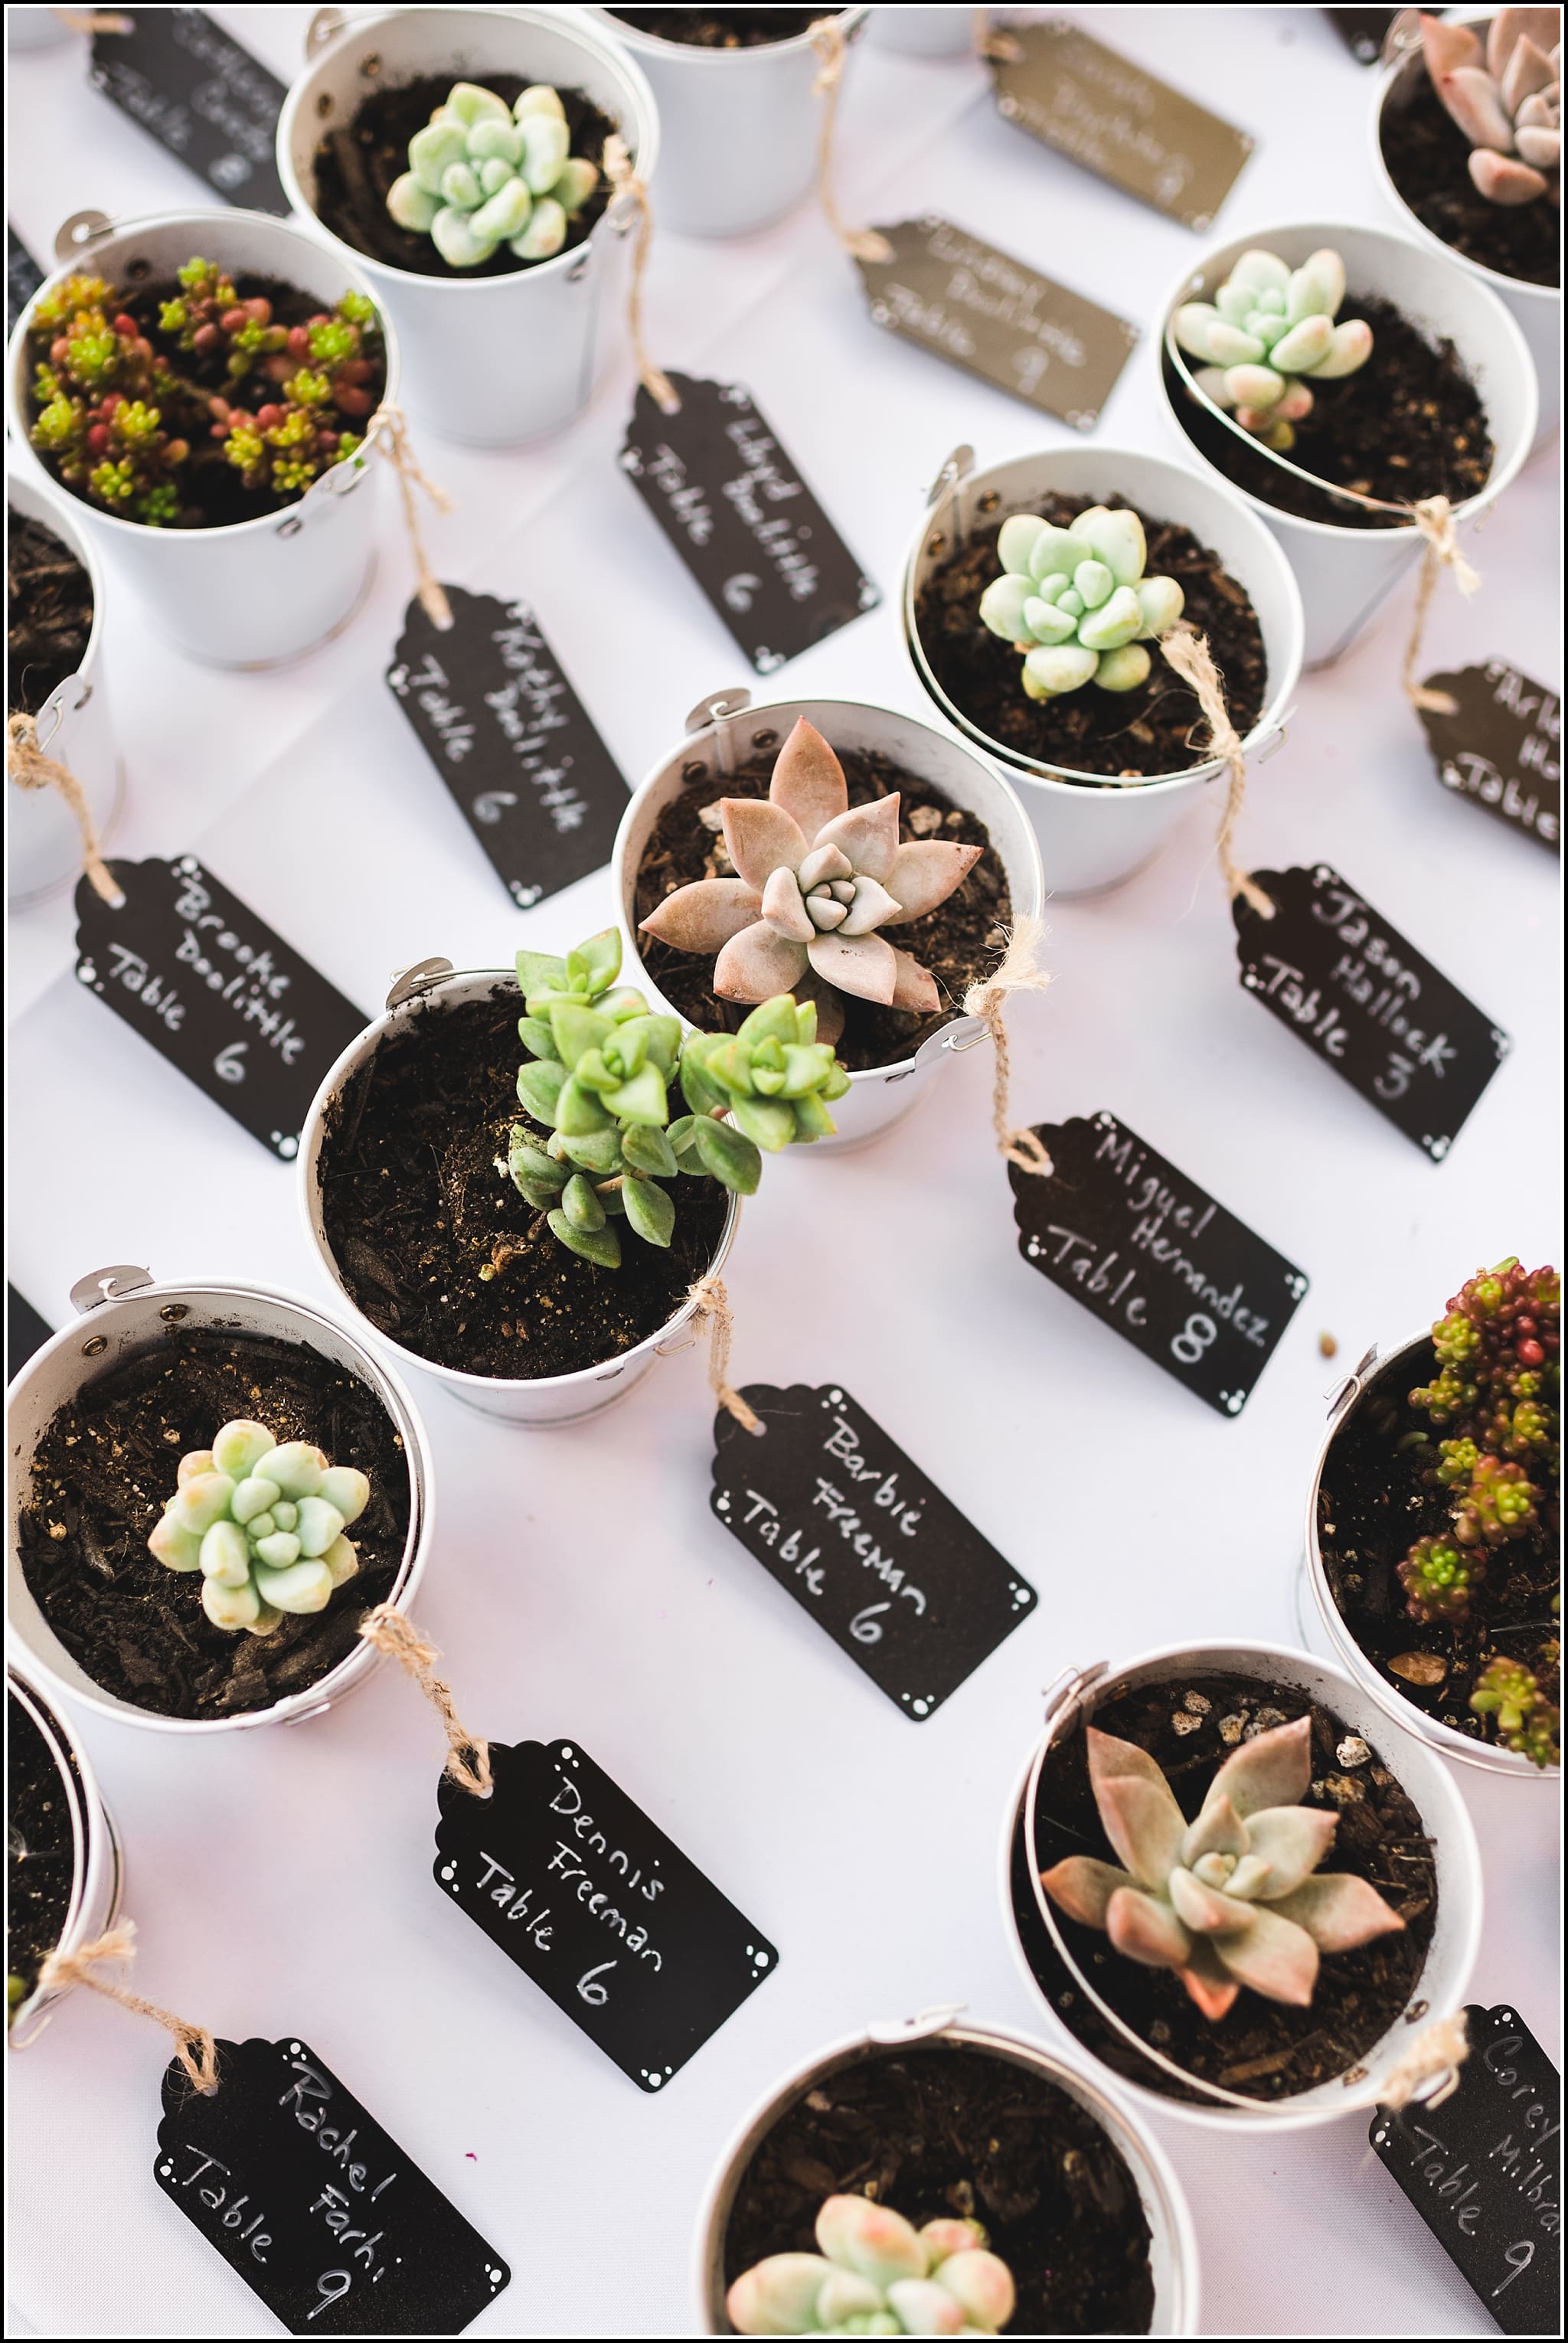  favorite wedding images 2016, wedding photos from 2016, our favorite wedding photos, succulent plant wedding gifts